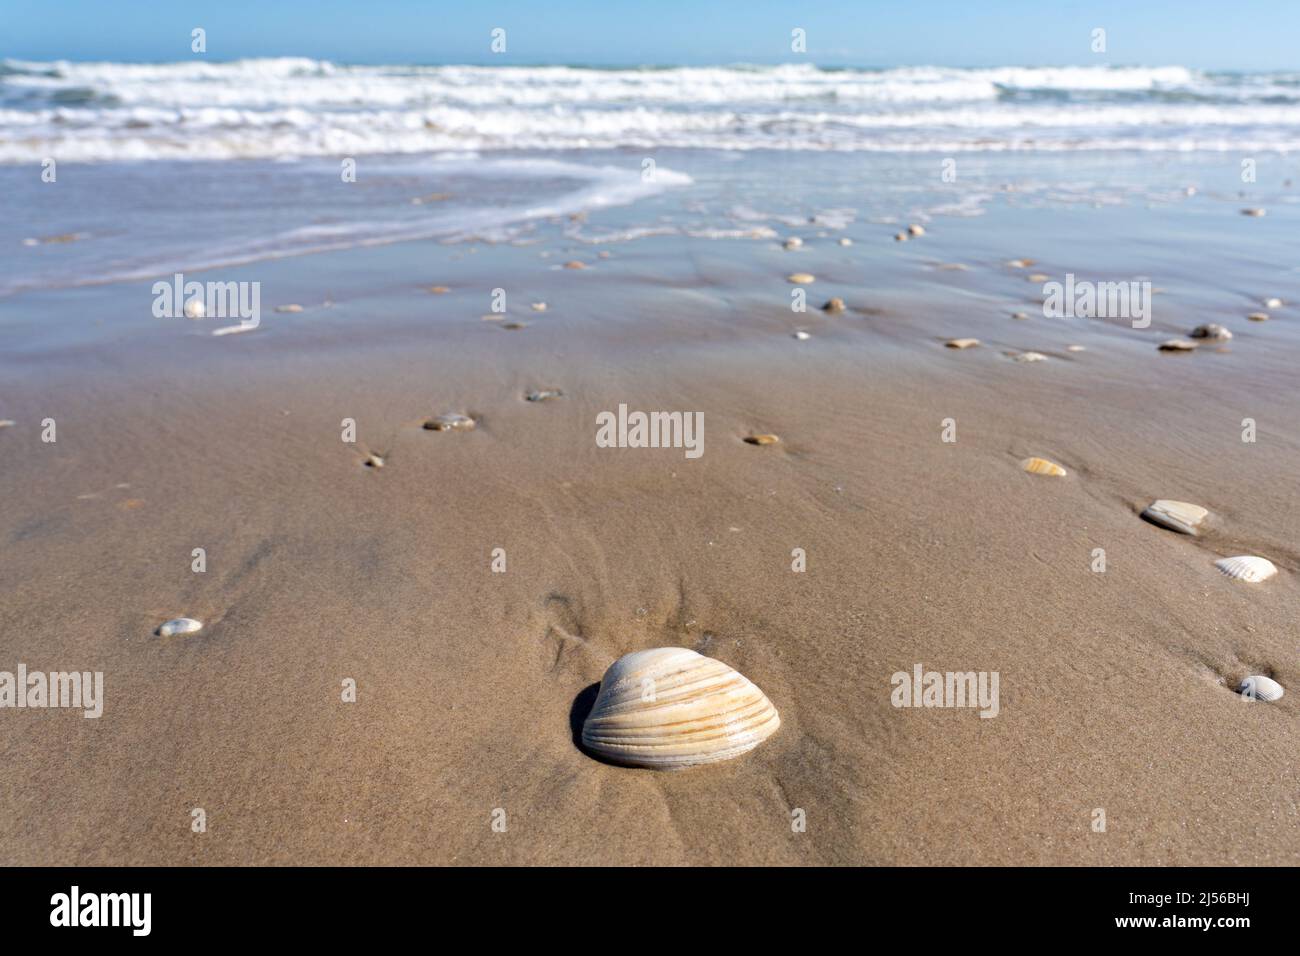 A large Southern Quahog seashell, Mercenaria mercenaria, washed up on the beach by the waves on South Padre Island, Texas. Stock Photo